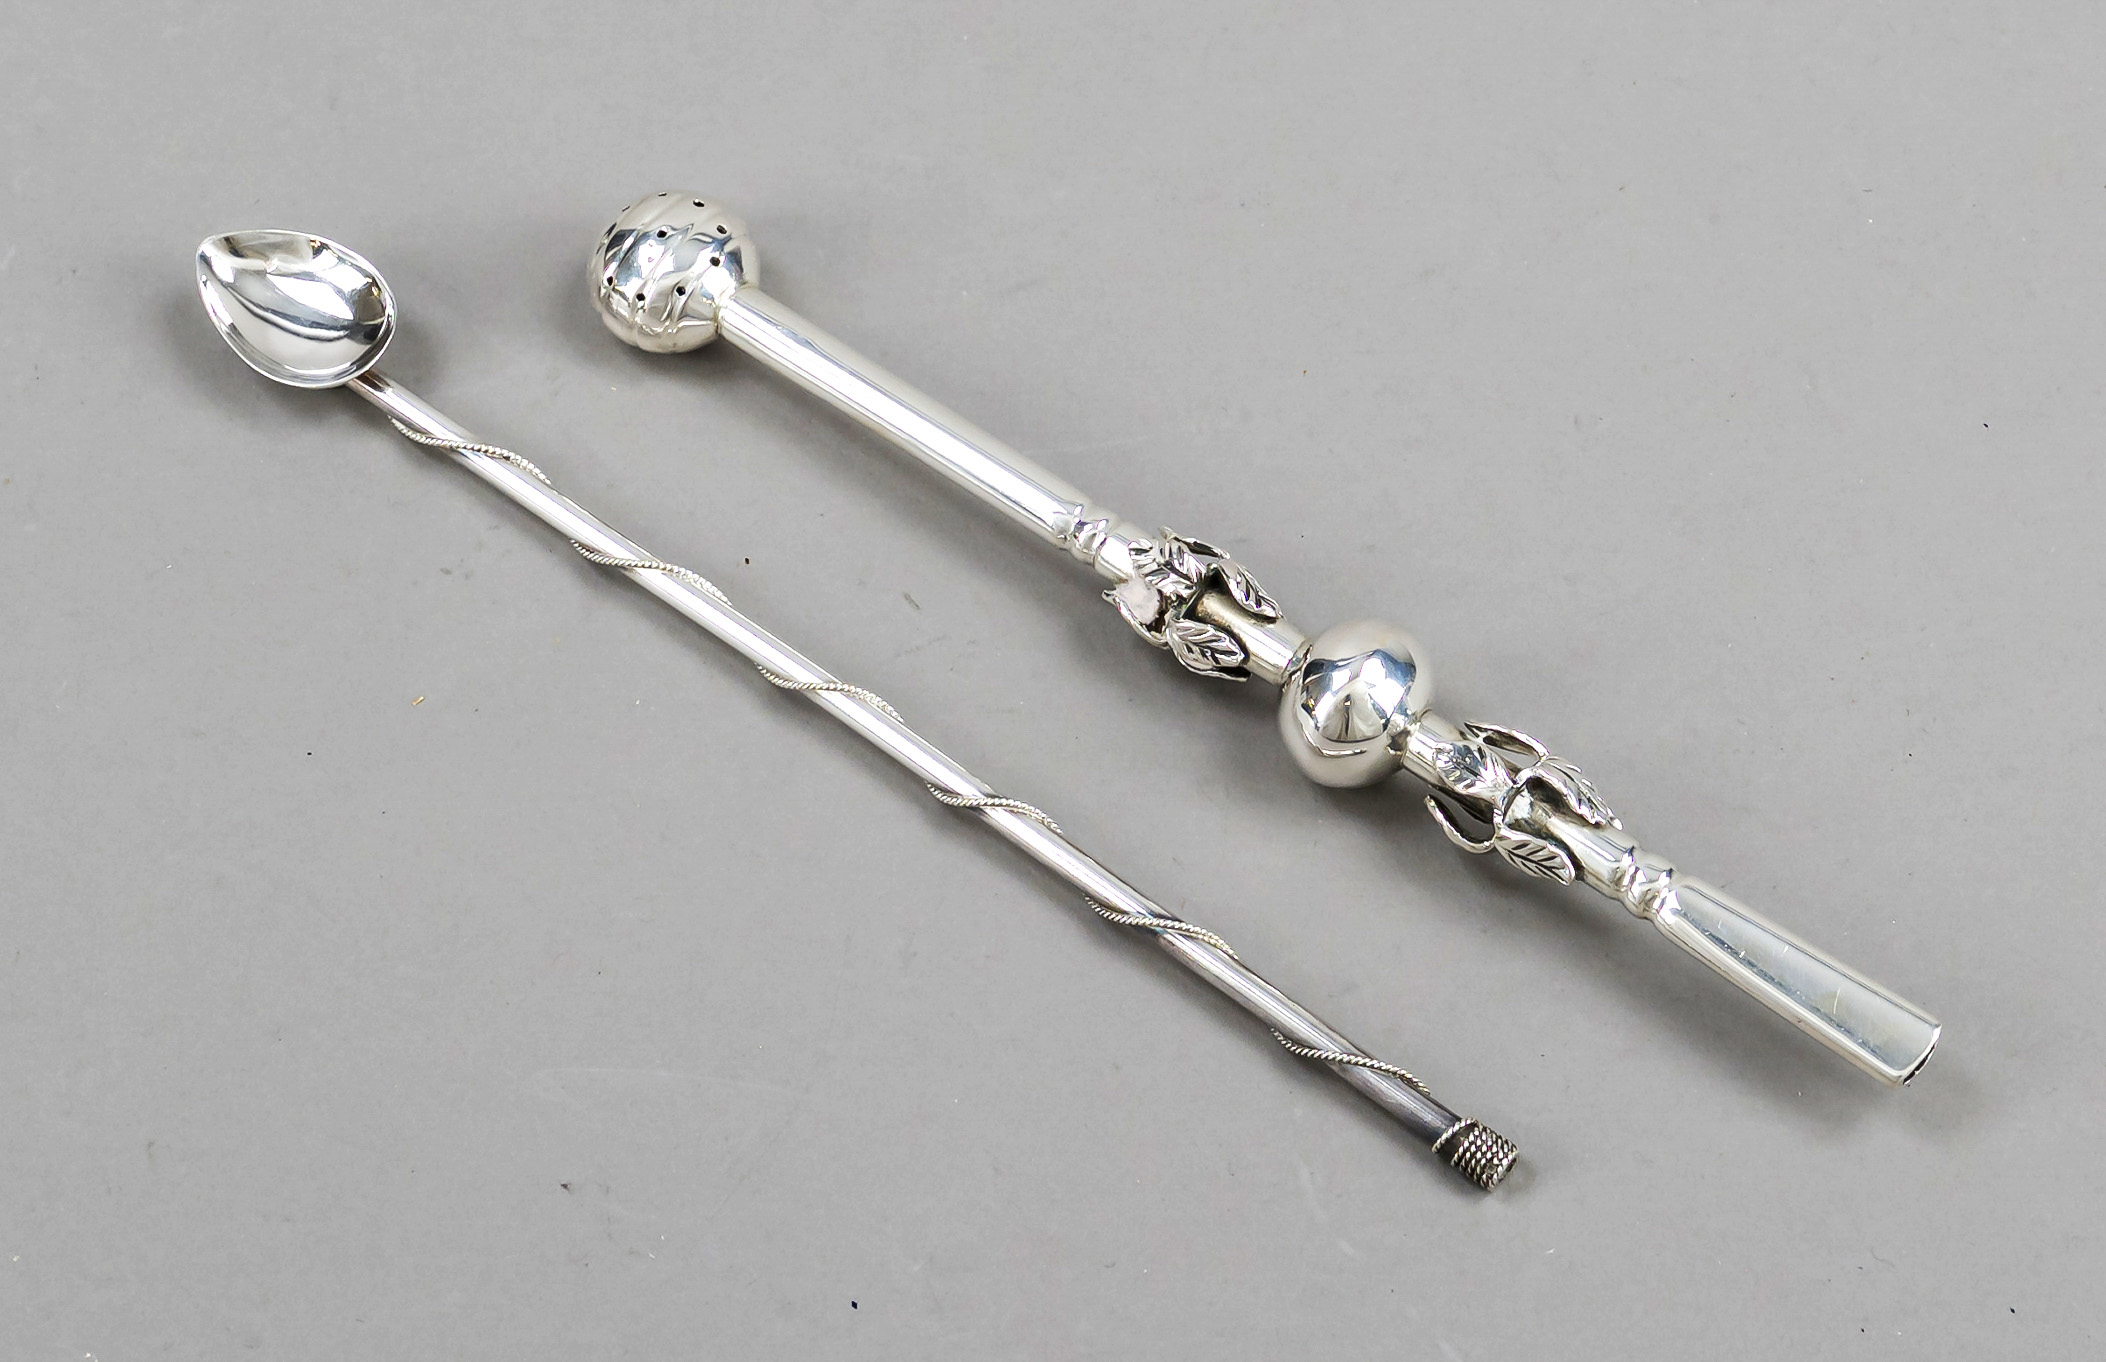 Two pieces for mate tea, 20th century, silver tested, bombilla, l. 21.5 cm and spoon, l. 22.5 cm,